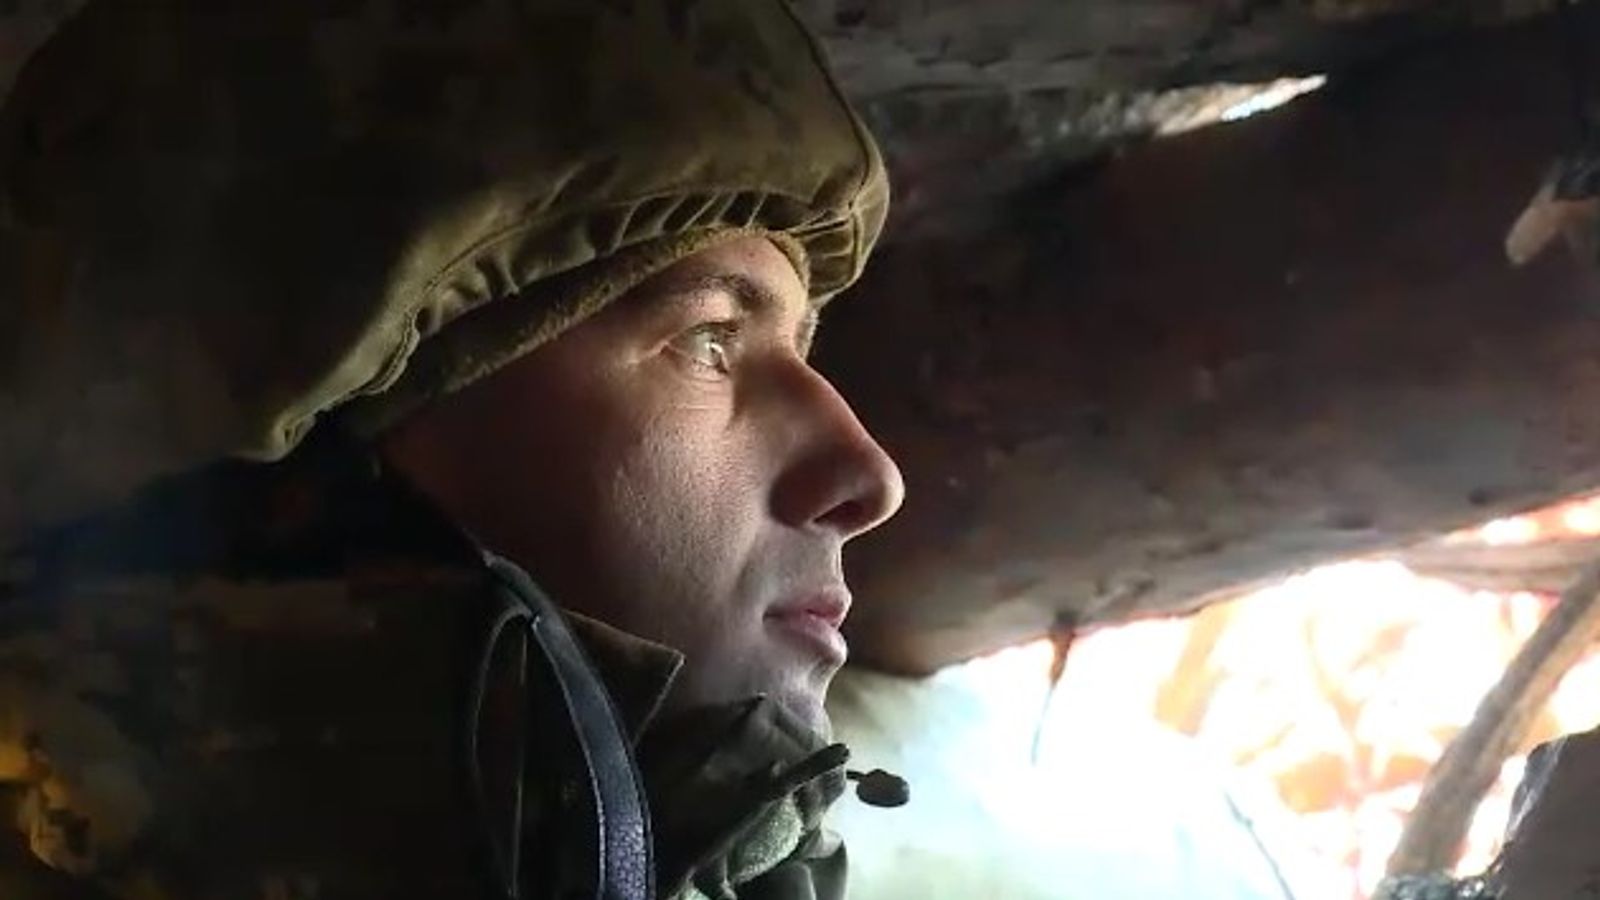 Inside Ukraine's trenches: 'It's like the First World War - very compact, claustrophobic'